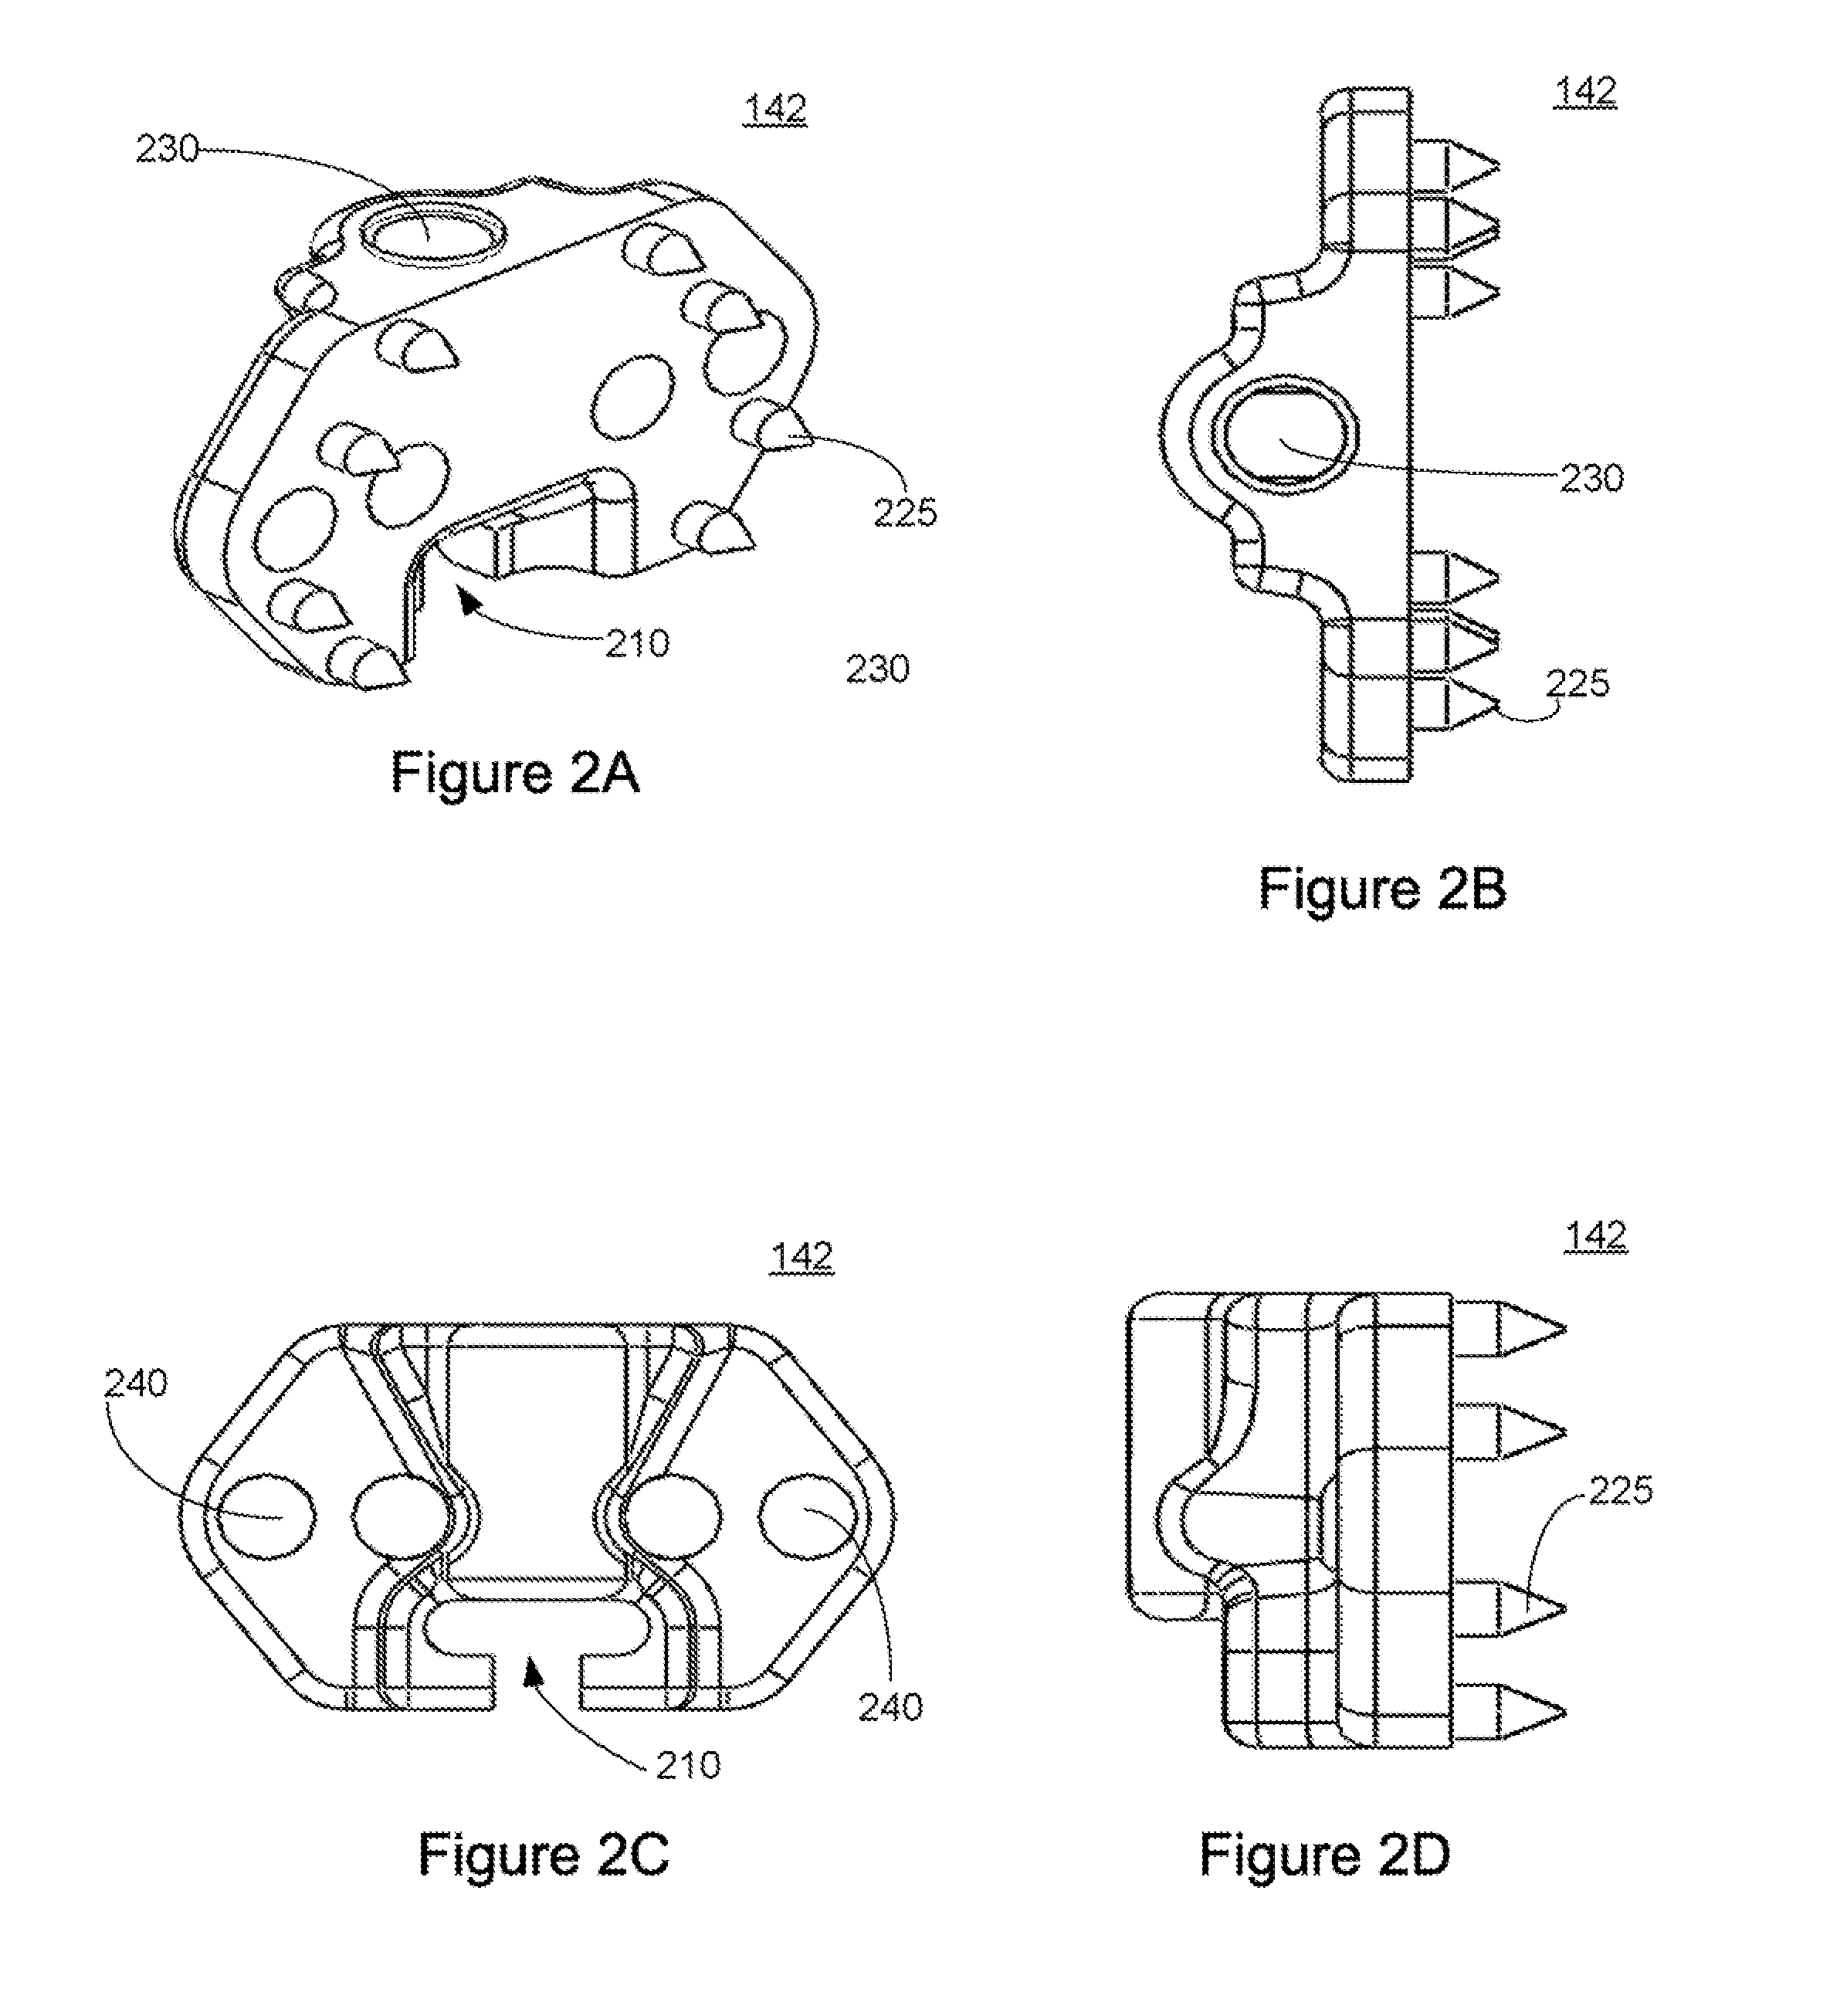 Interspinous Process Spacing Device